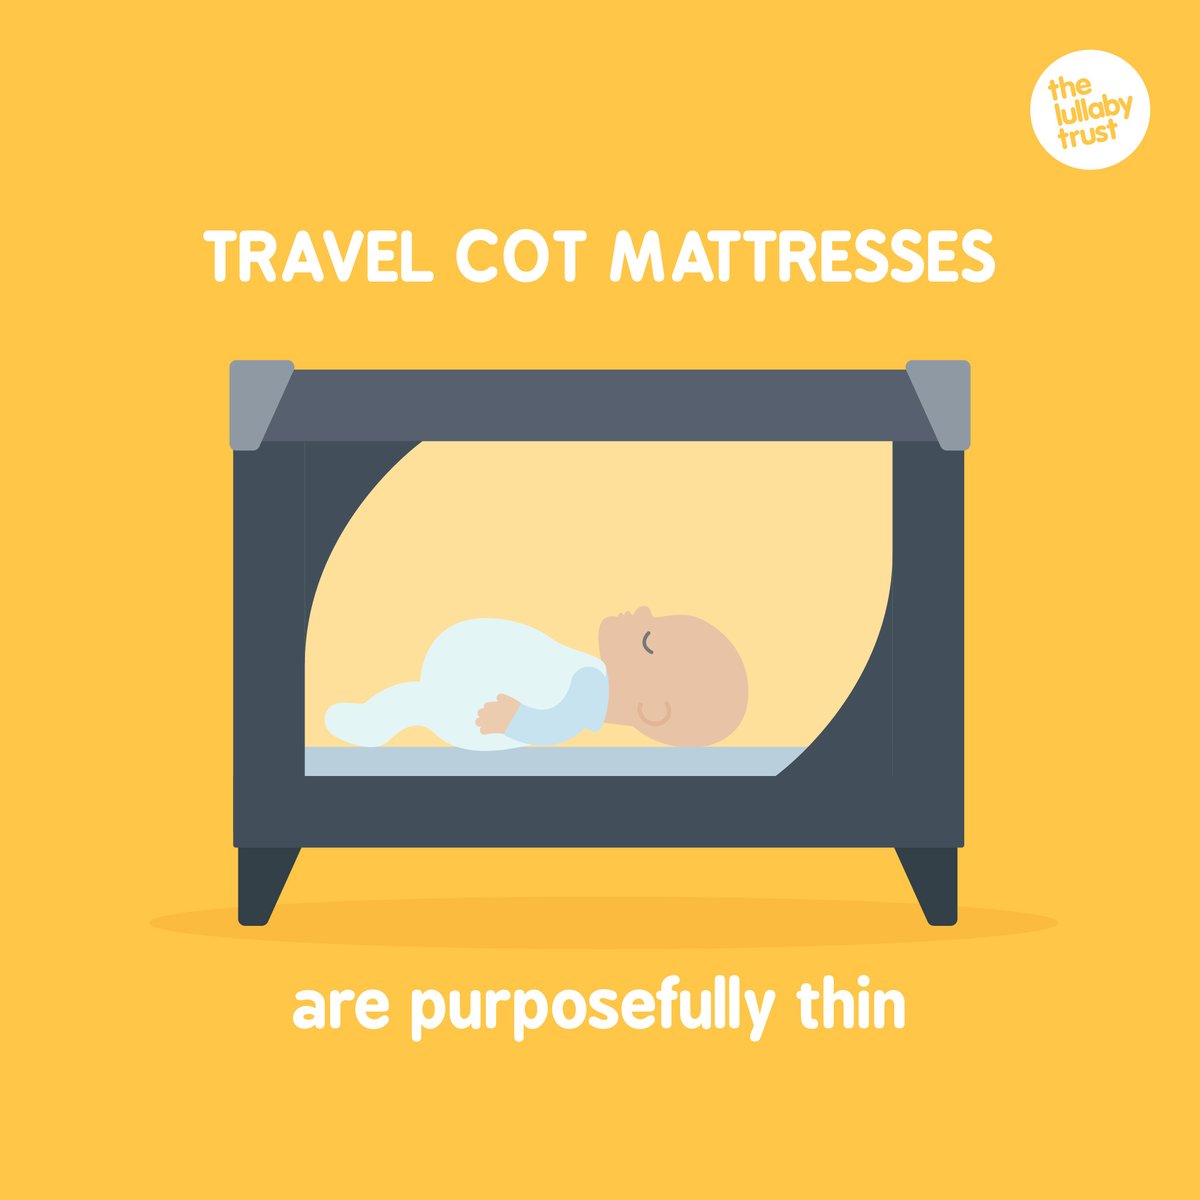 Travel cot mattresses are often thinner and harder than cot mattresses, but don’t be tempted to ‘pad it out’. Extra quilts or folded blankets increase the risk of accidents and SIDS. Just make sure it is firm, flat, fits the frame well, and has a waterproof cover.